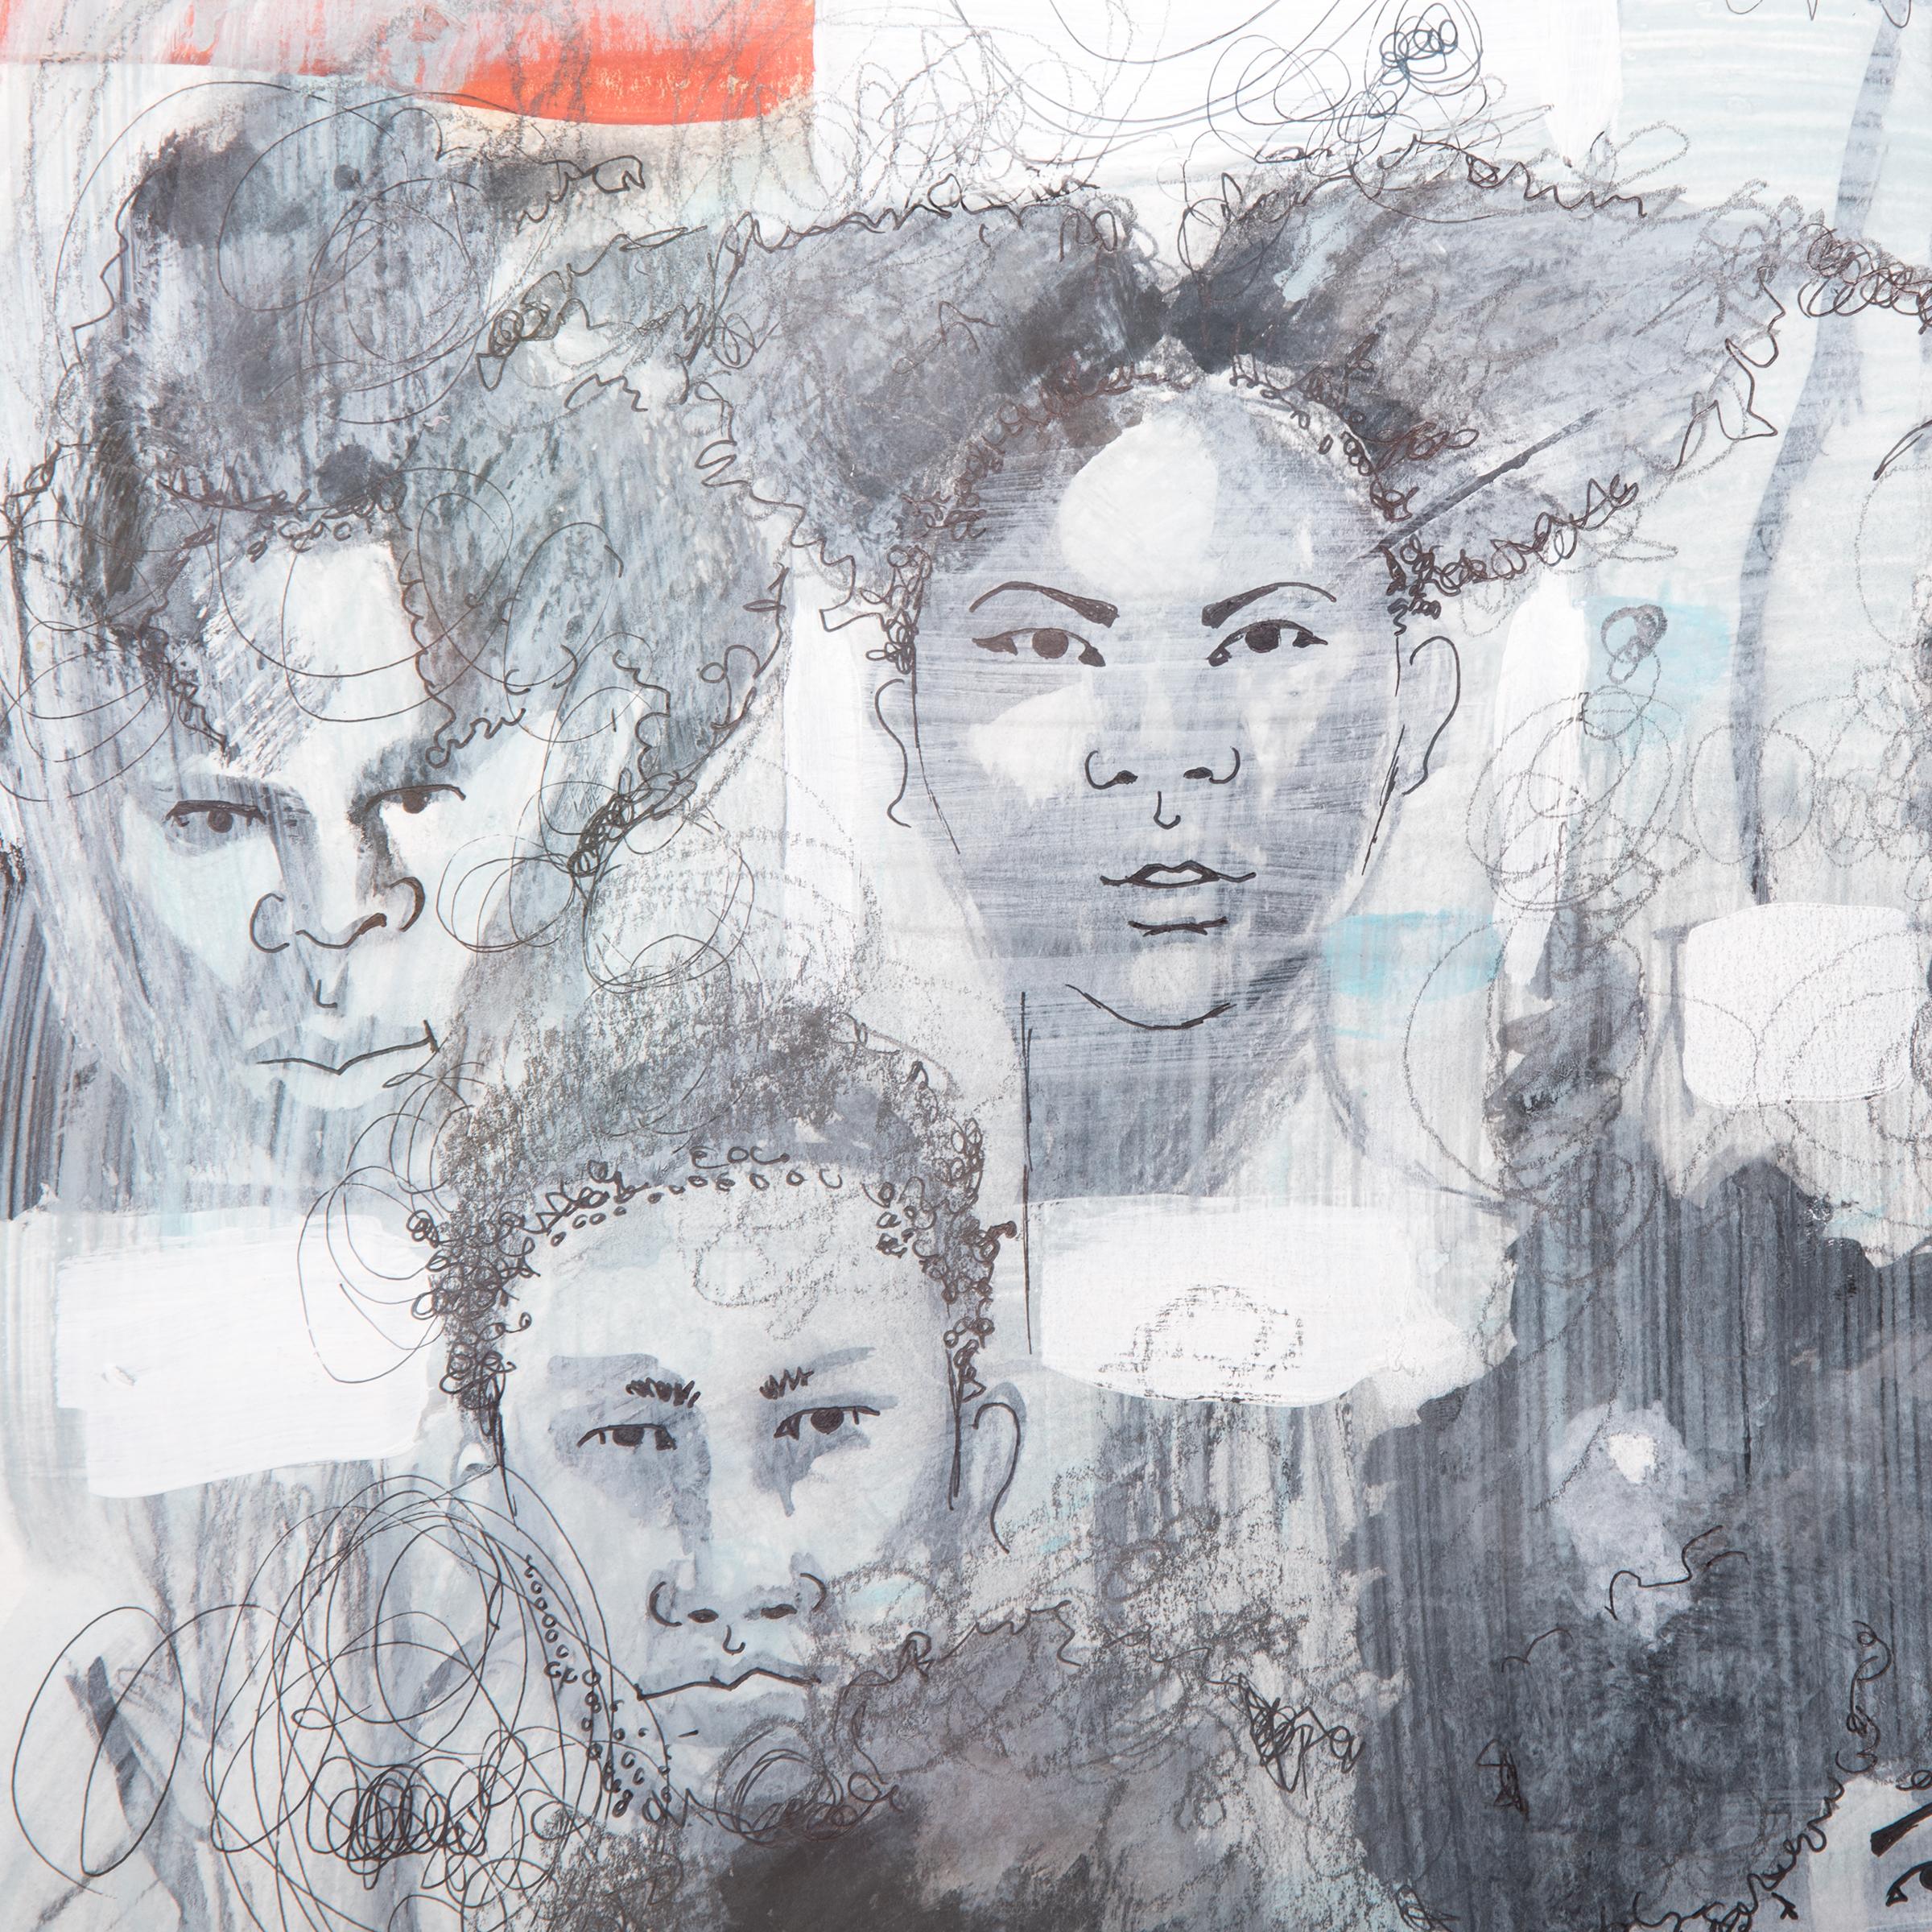 Tracy Crump uses washes of grey, white and aqua to both conceal and reveal sensitively drawn figures. Each figure stands alone as an individual, possessing unique features and hairstyles, yet, as the title of the series suggests, the men and women